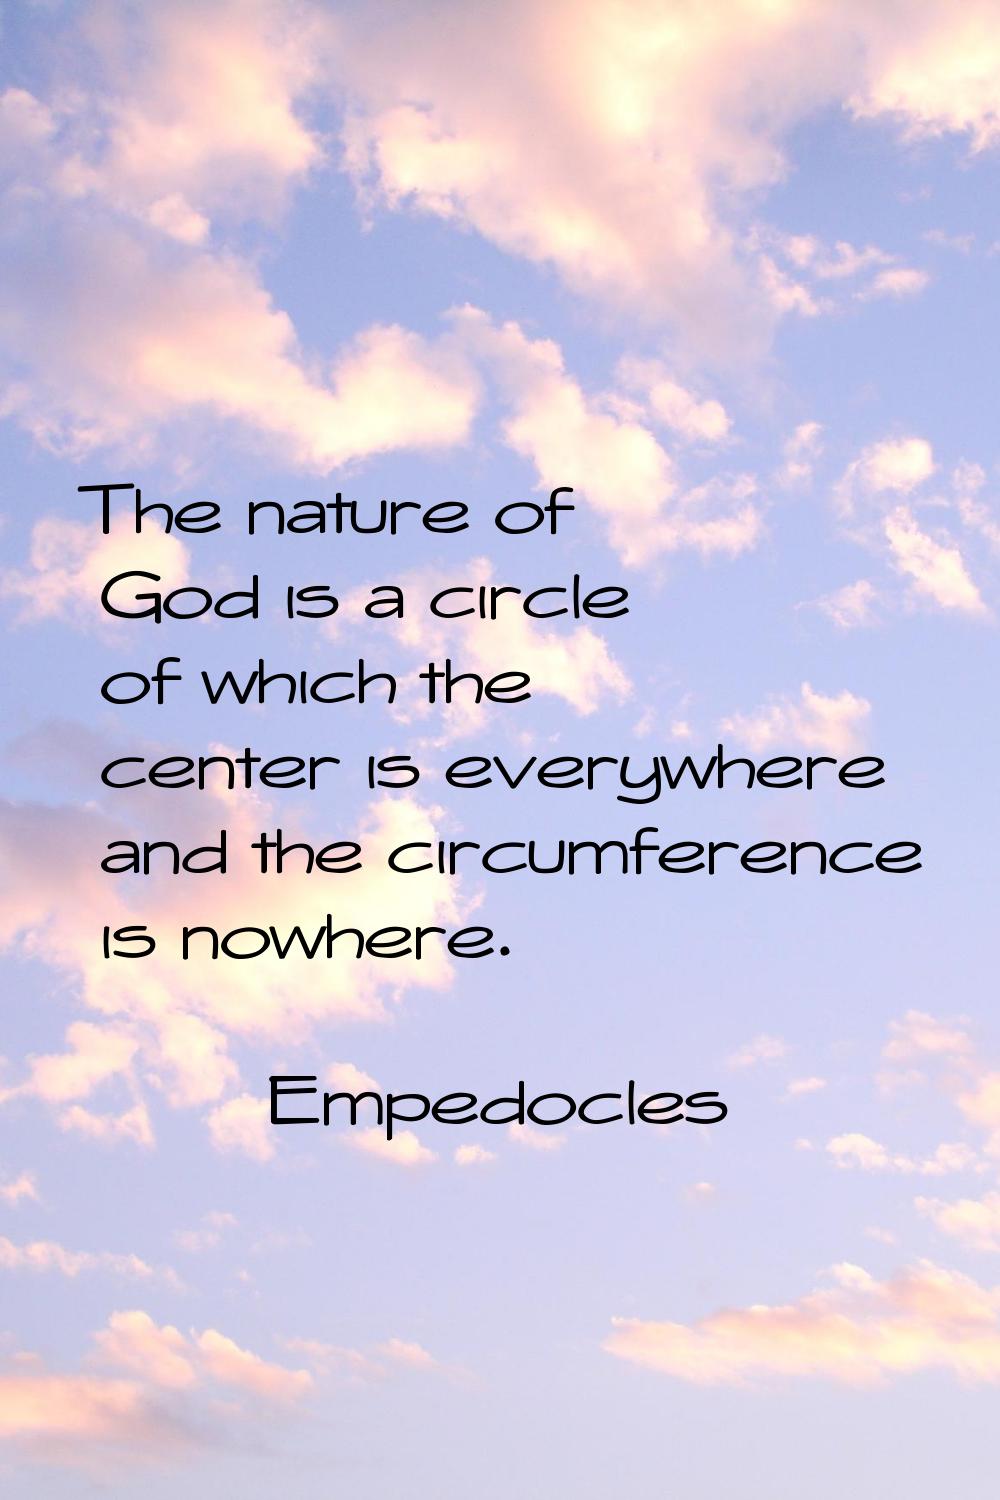 The nature of God is a circle of which the center is everywhere and the circumference is nowhere.